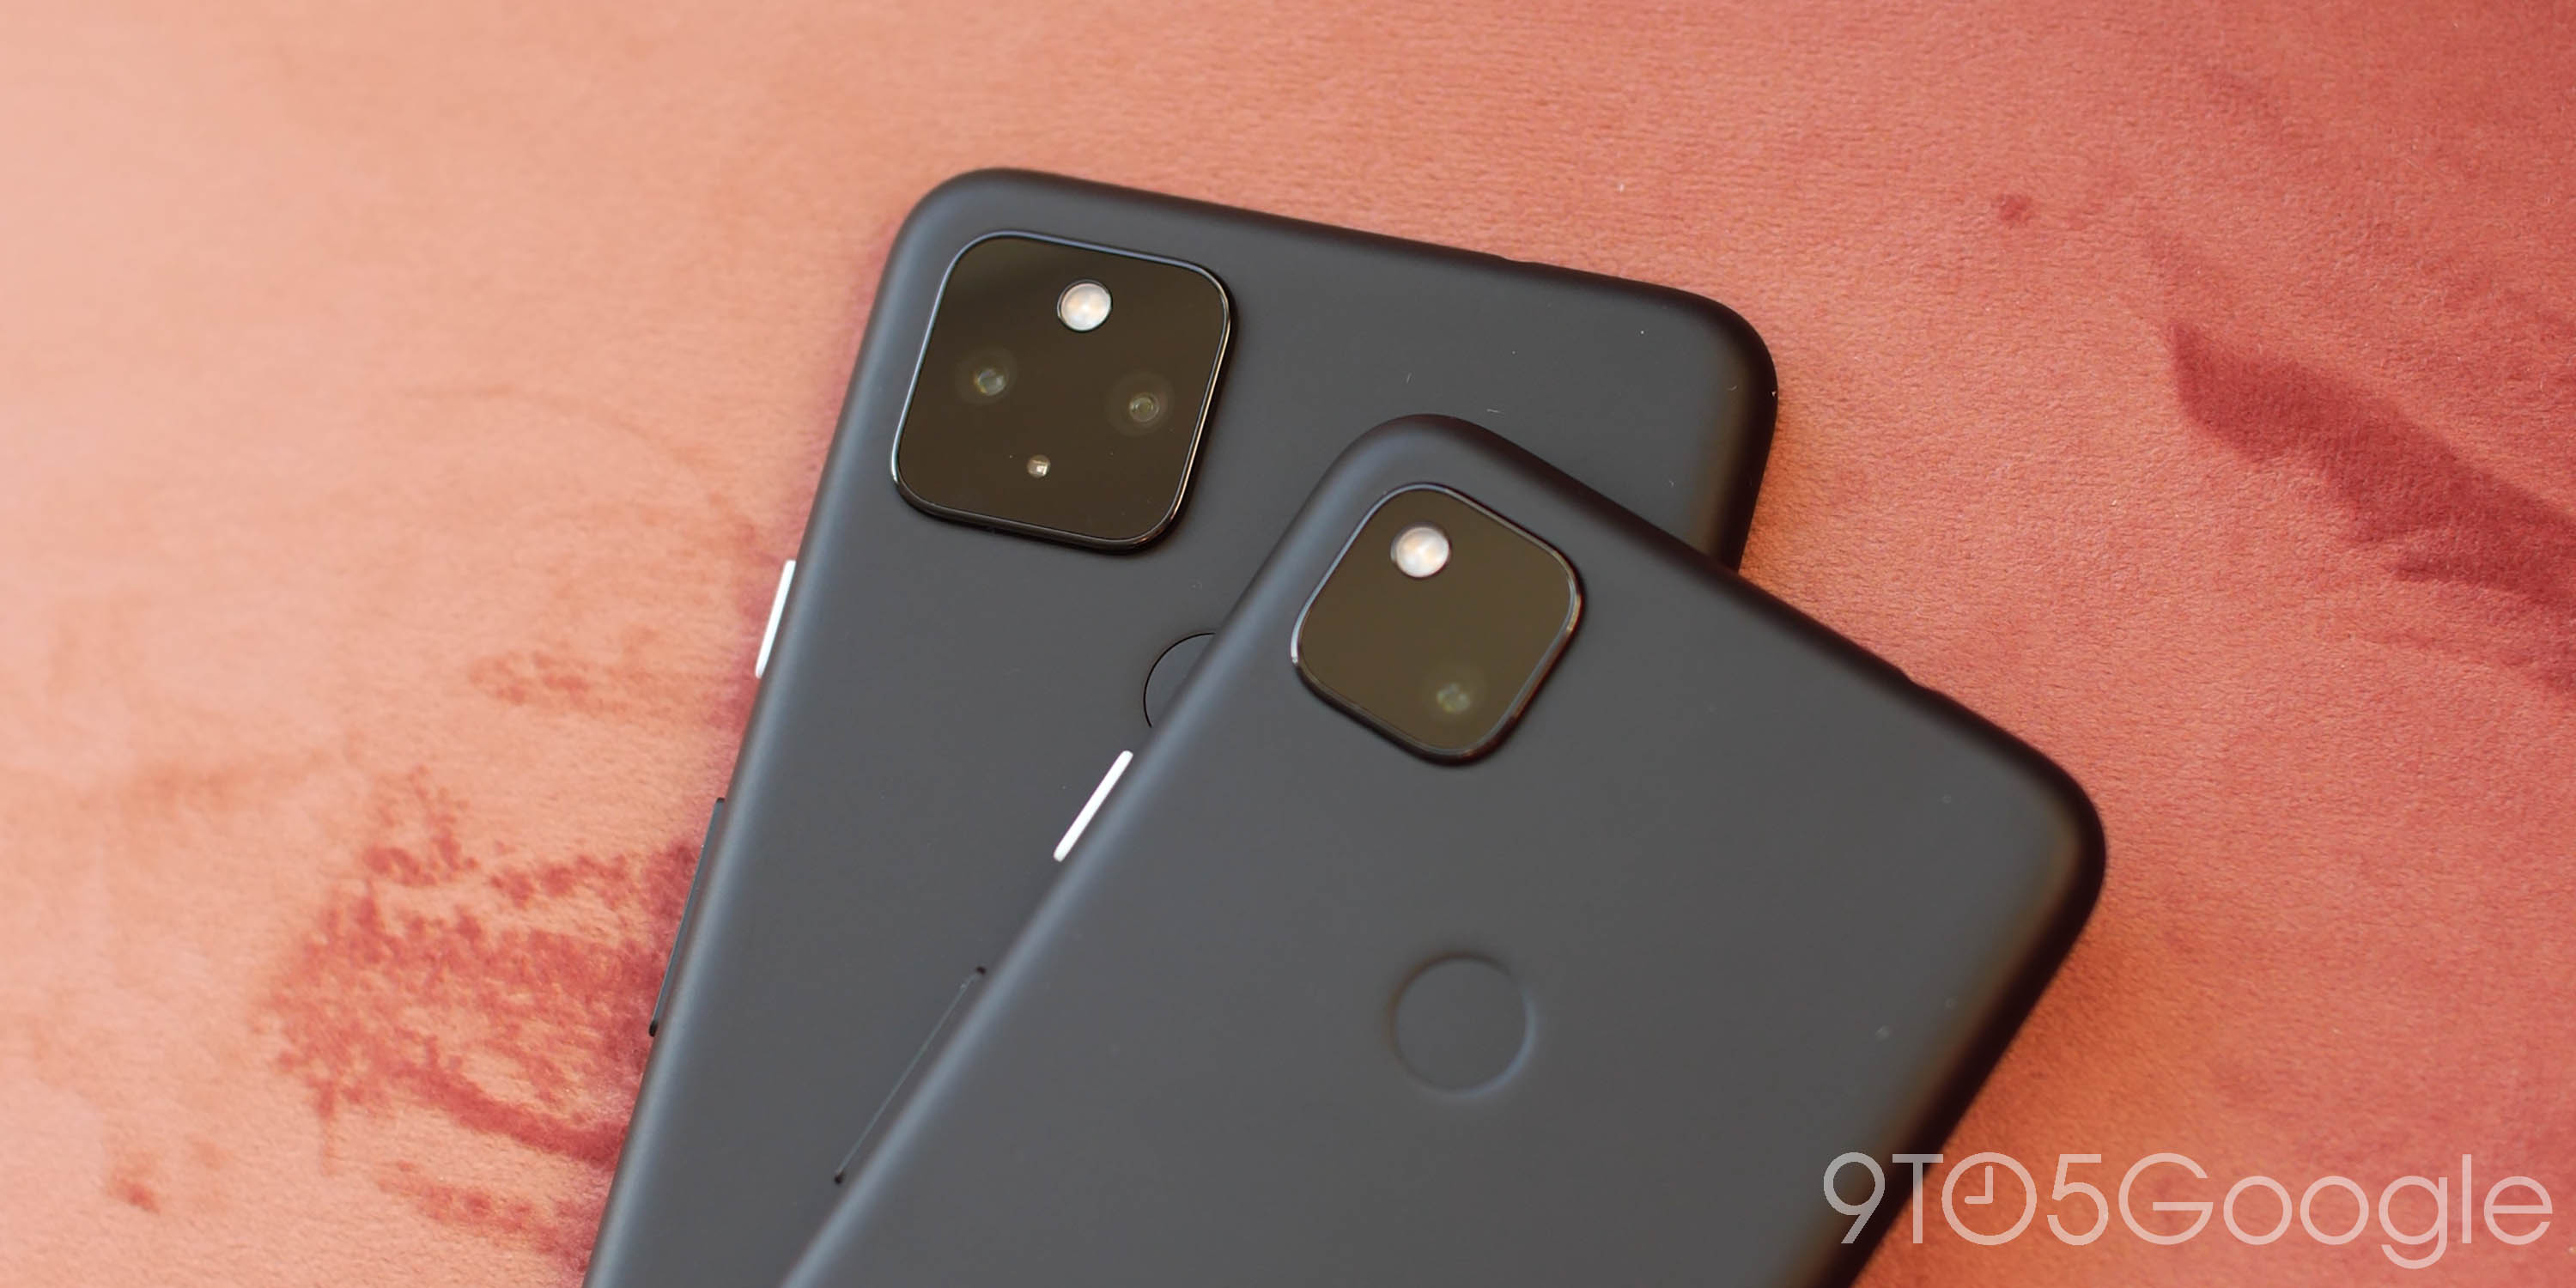 Pixel 5, 4a 5G adds Standalone (SA) on T-Mobile, Google Fi